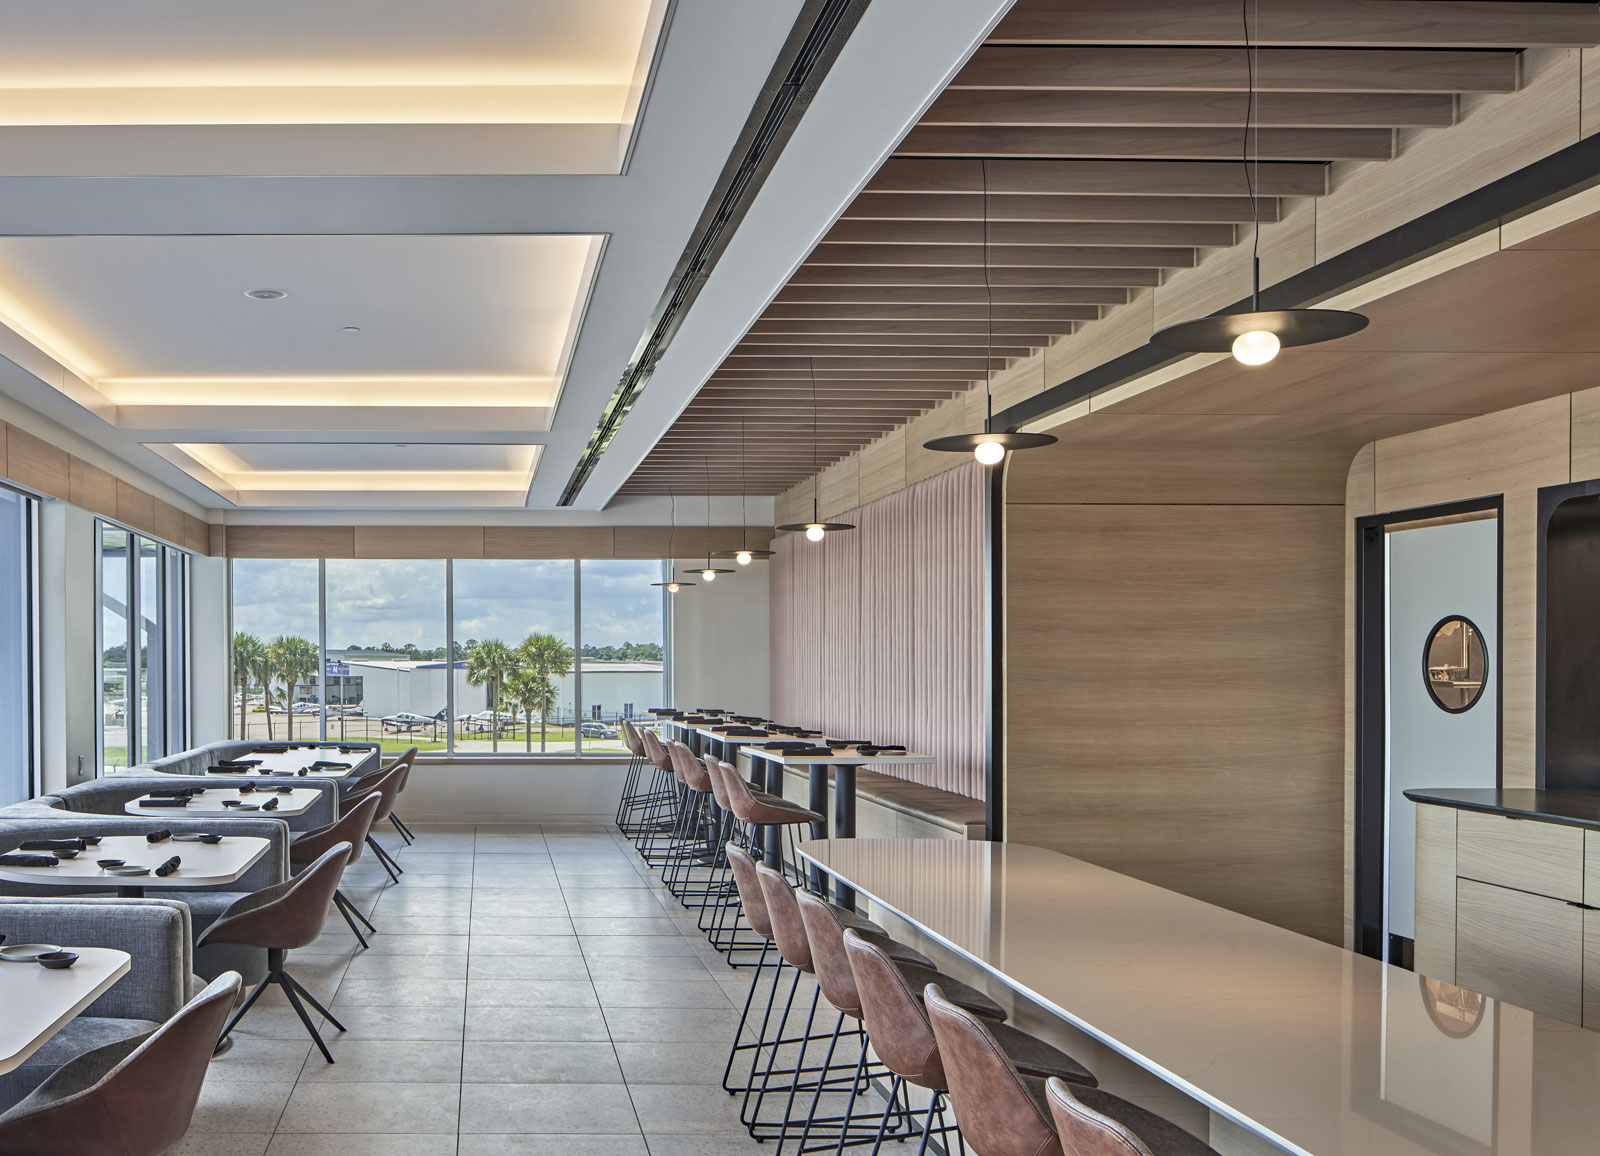 Vibia The Edit - Minimalism and comfort: a restaurant with view of Florida